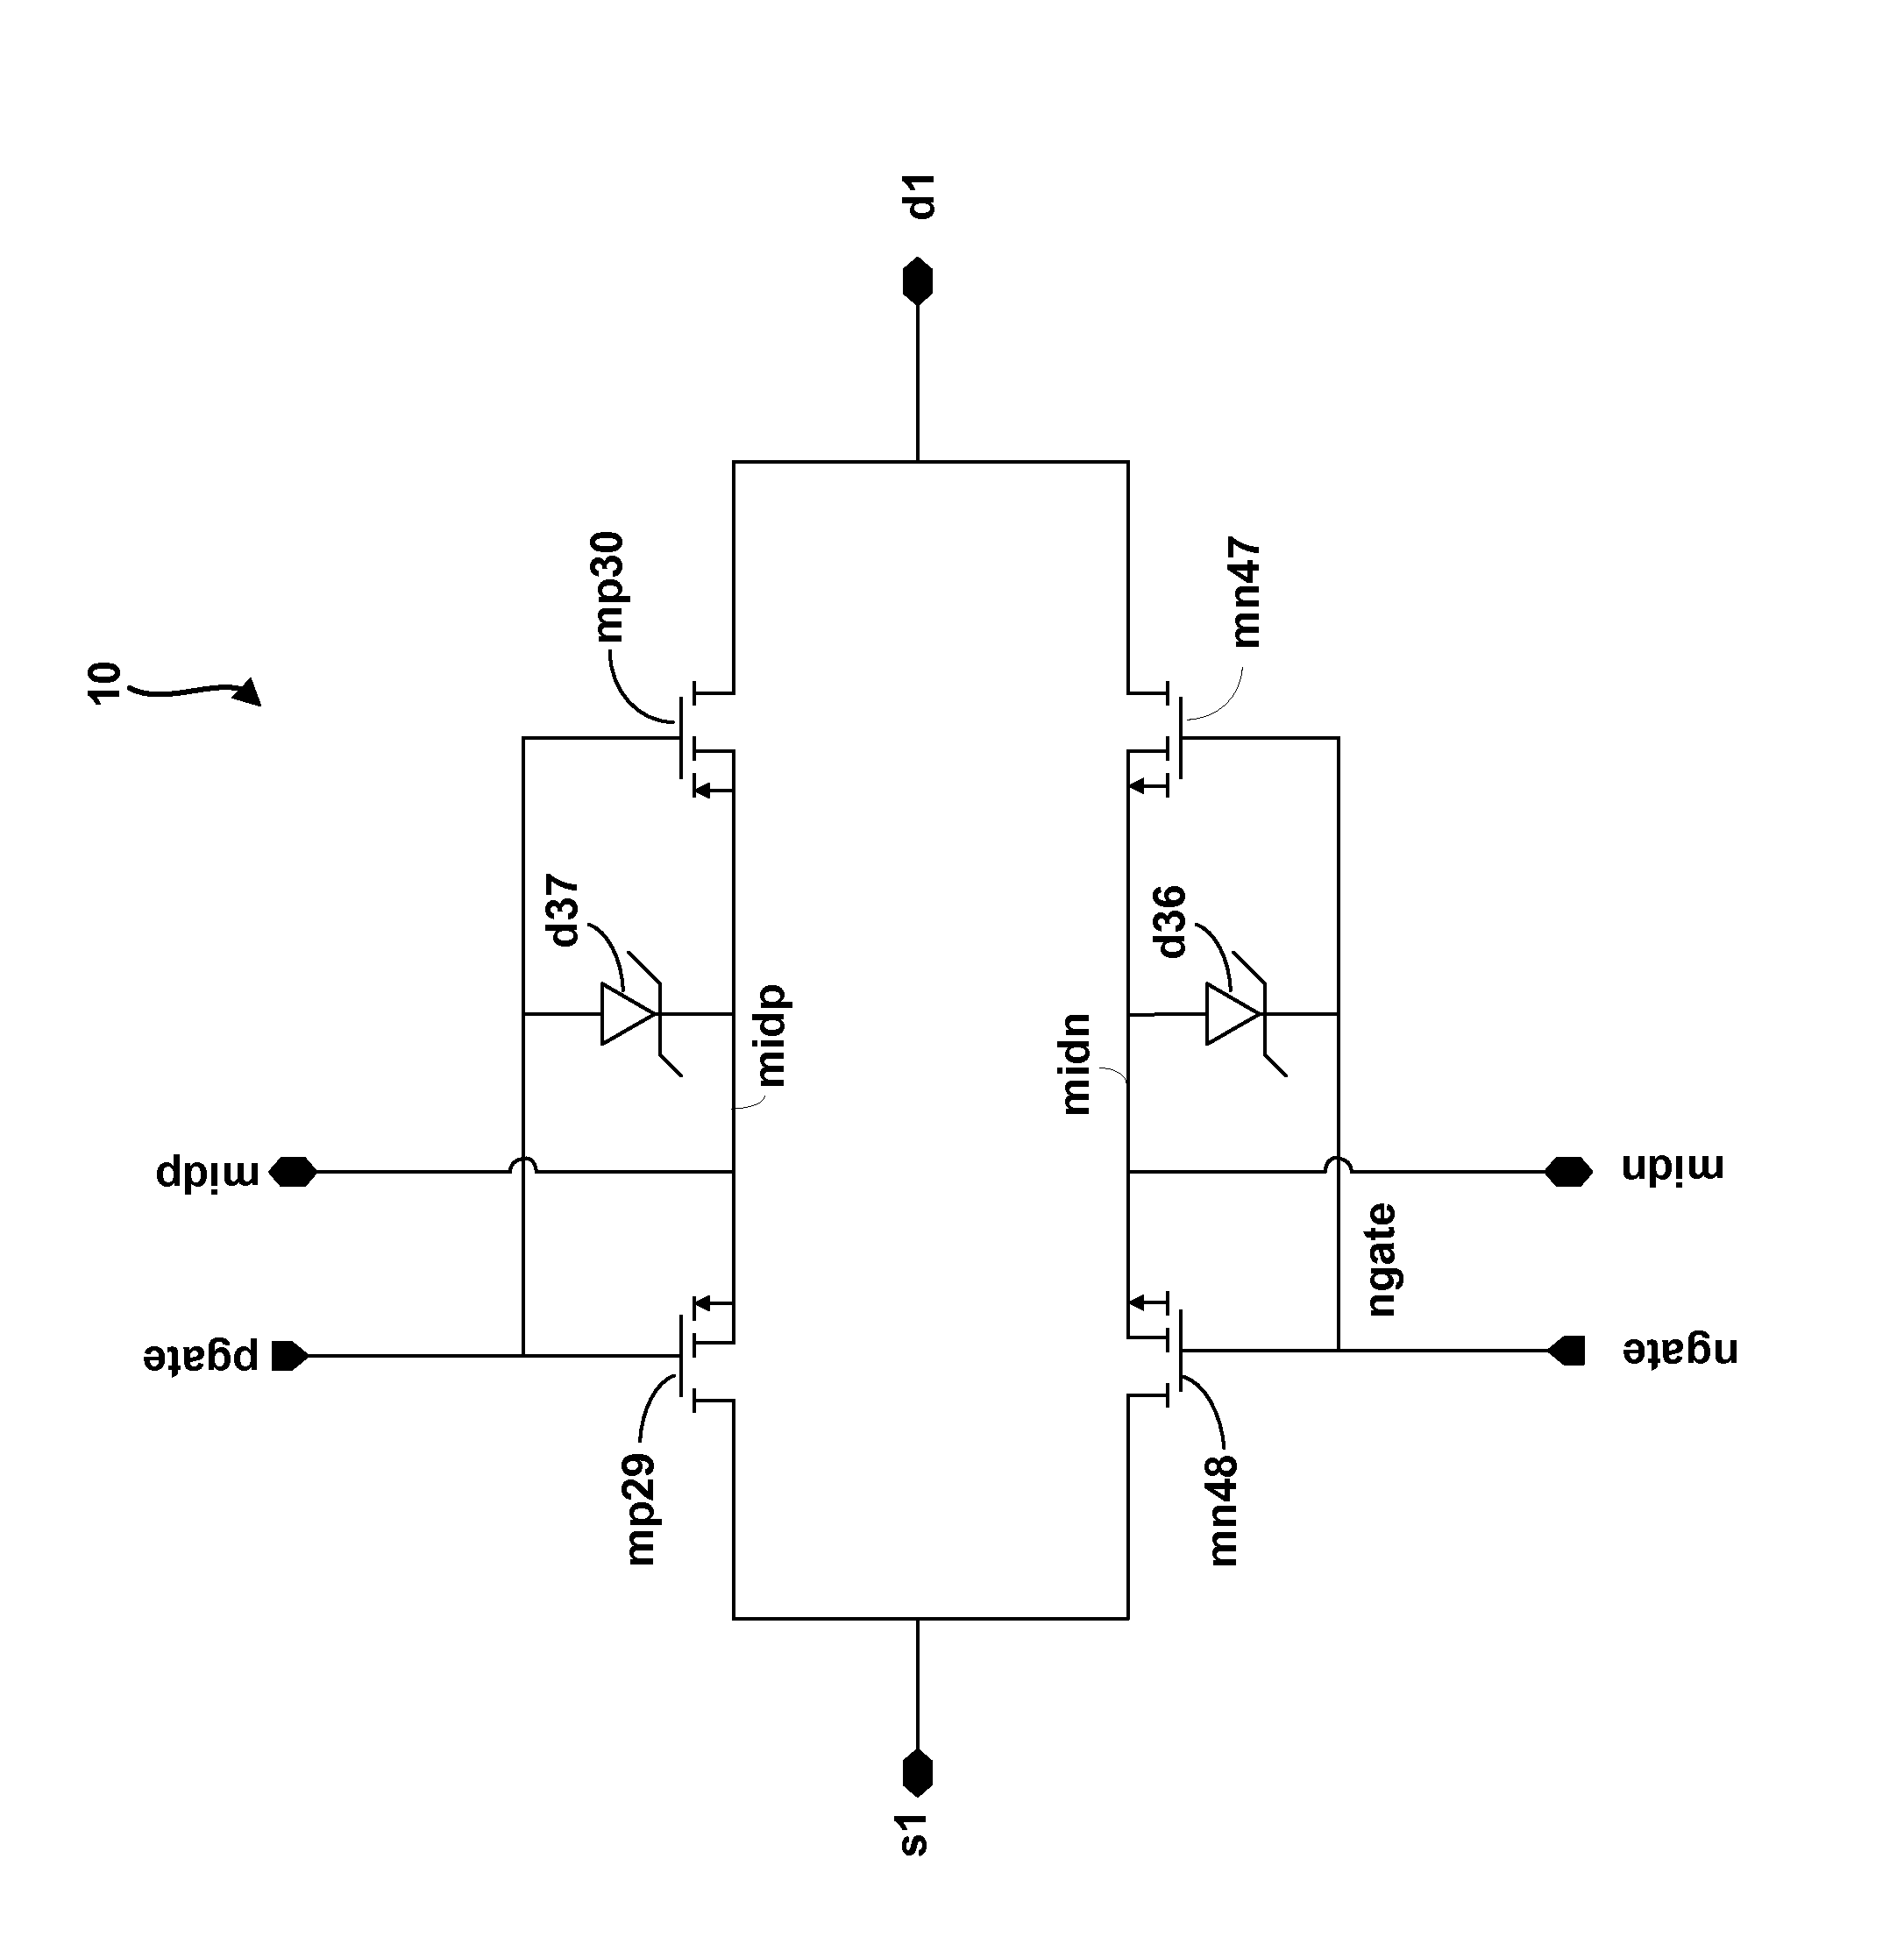 Bi-directional switch using series connected n-type mos devices in parallel with series connected p-type mos devices